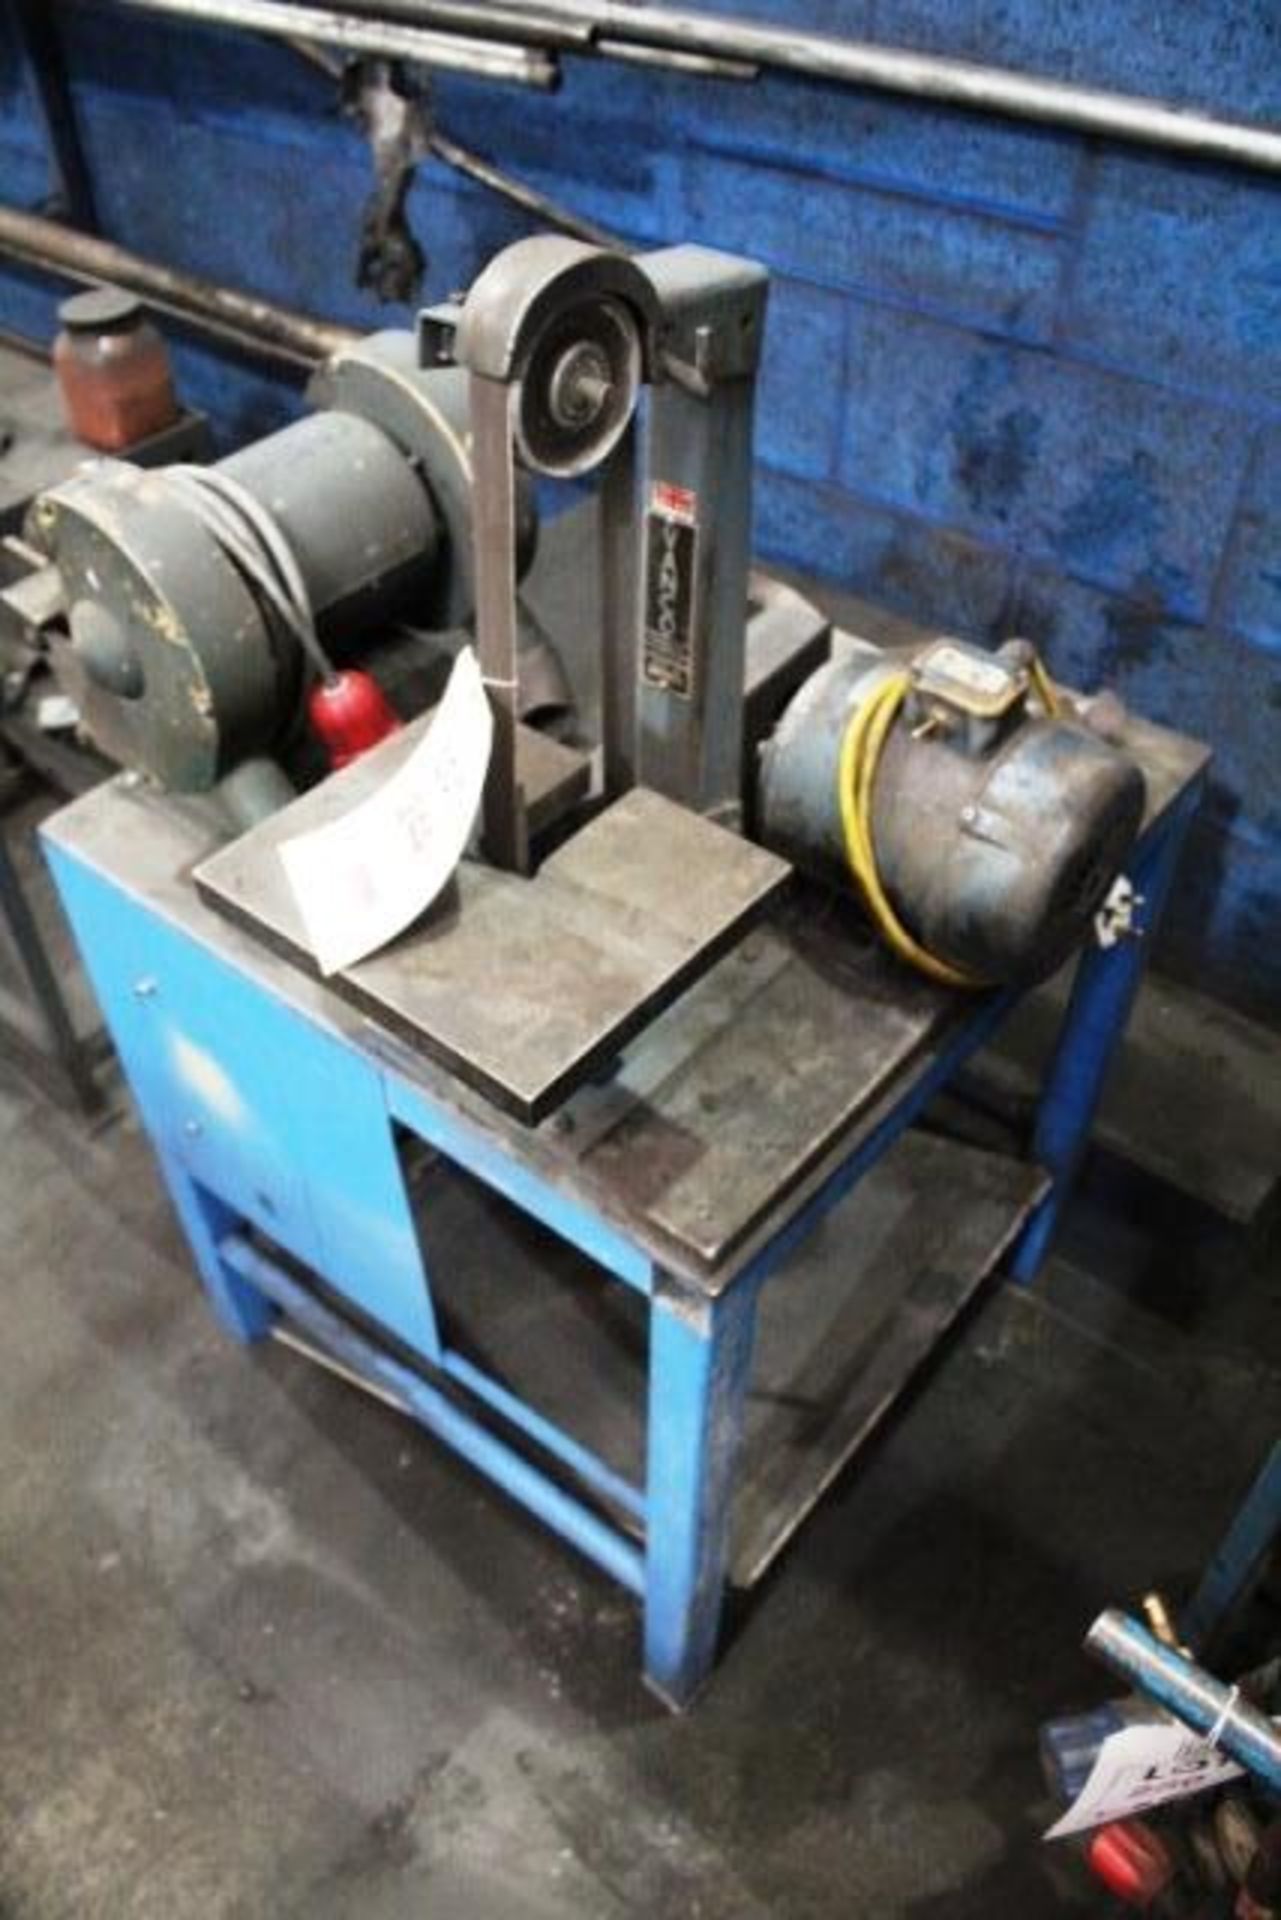 Vanco bench top vertical belt linisher, serial no. 5638 and a G8 double ended grinding wheel, - Image 2 of 3